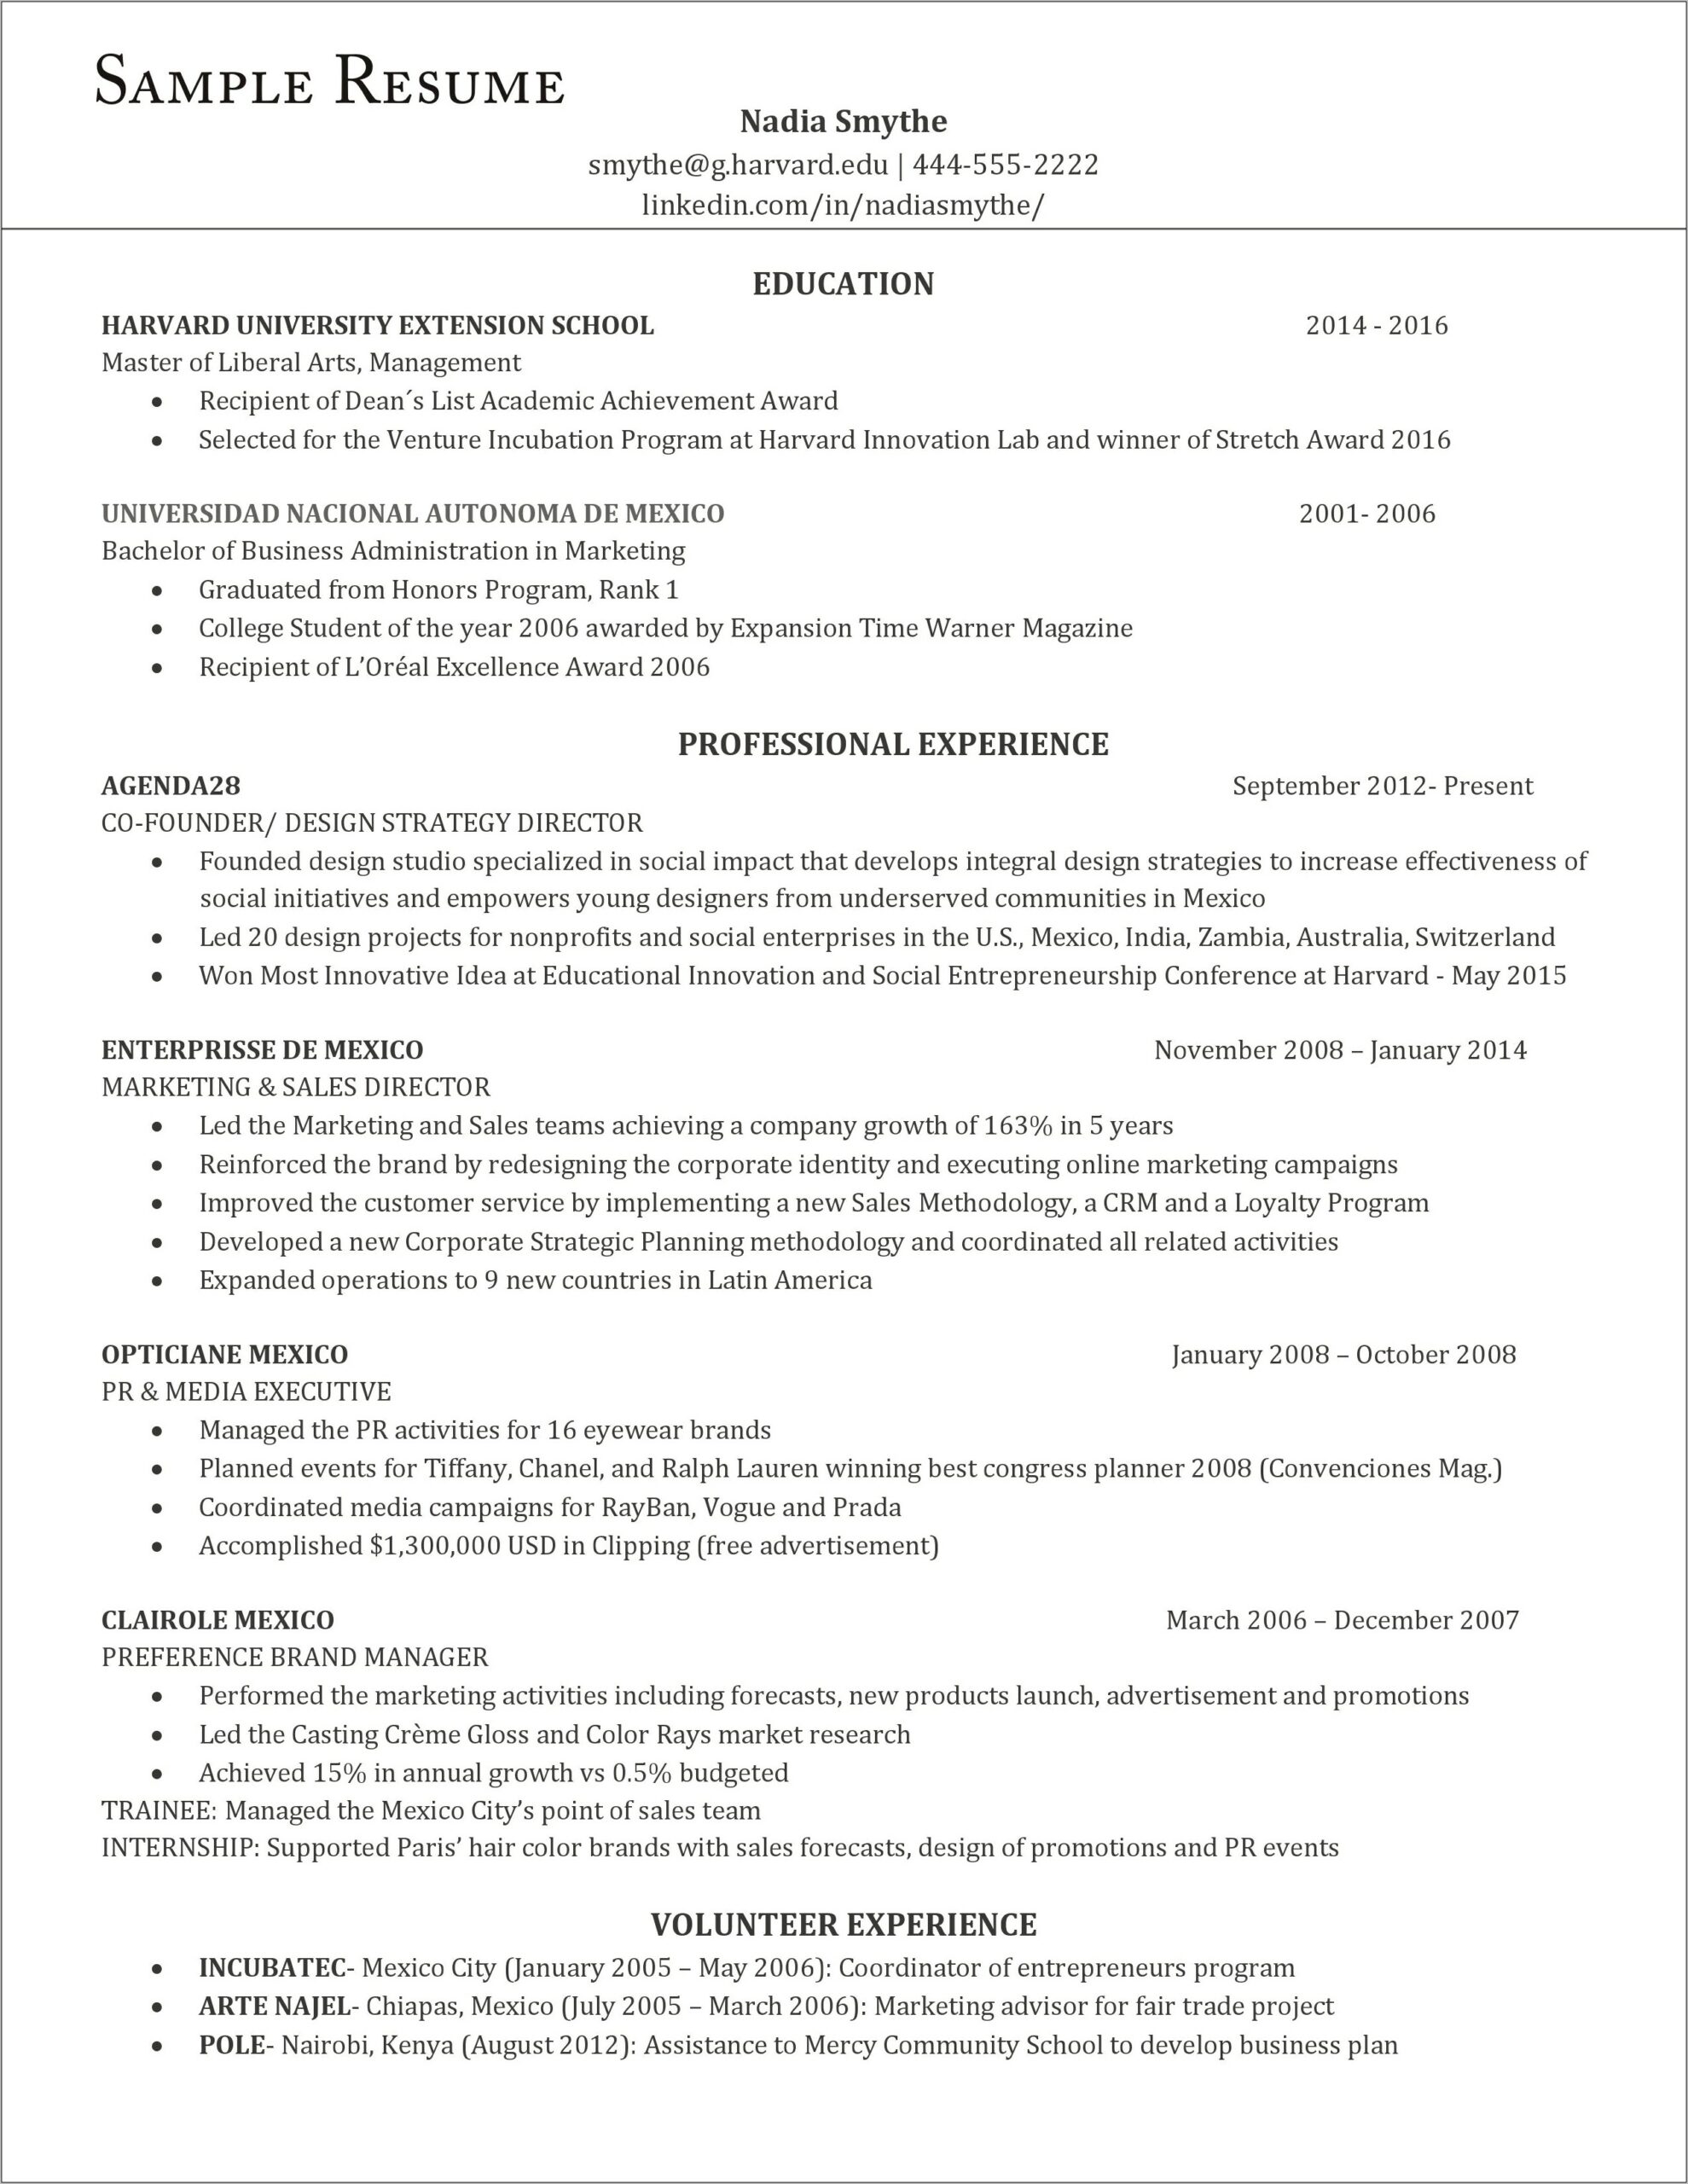 Goog Things To Have A Graduate School Resume